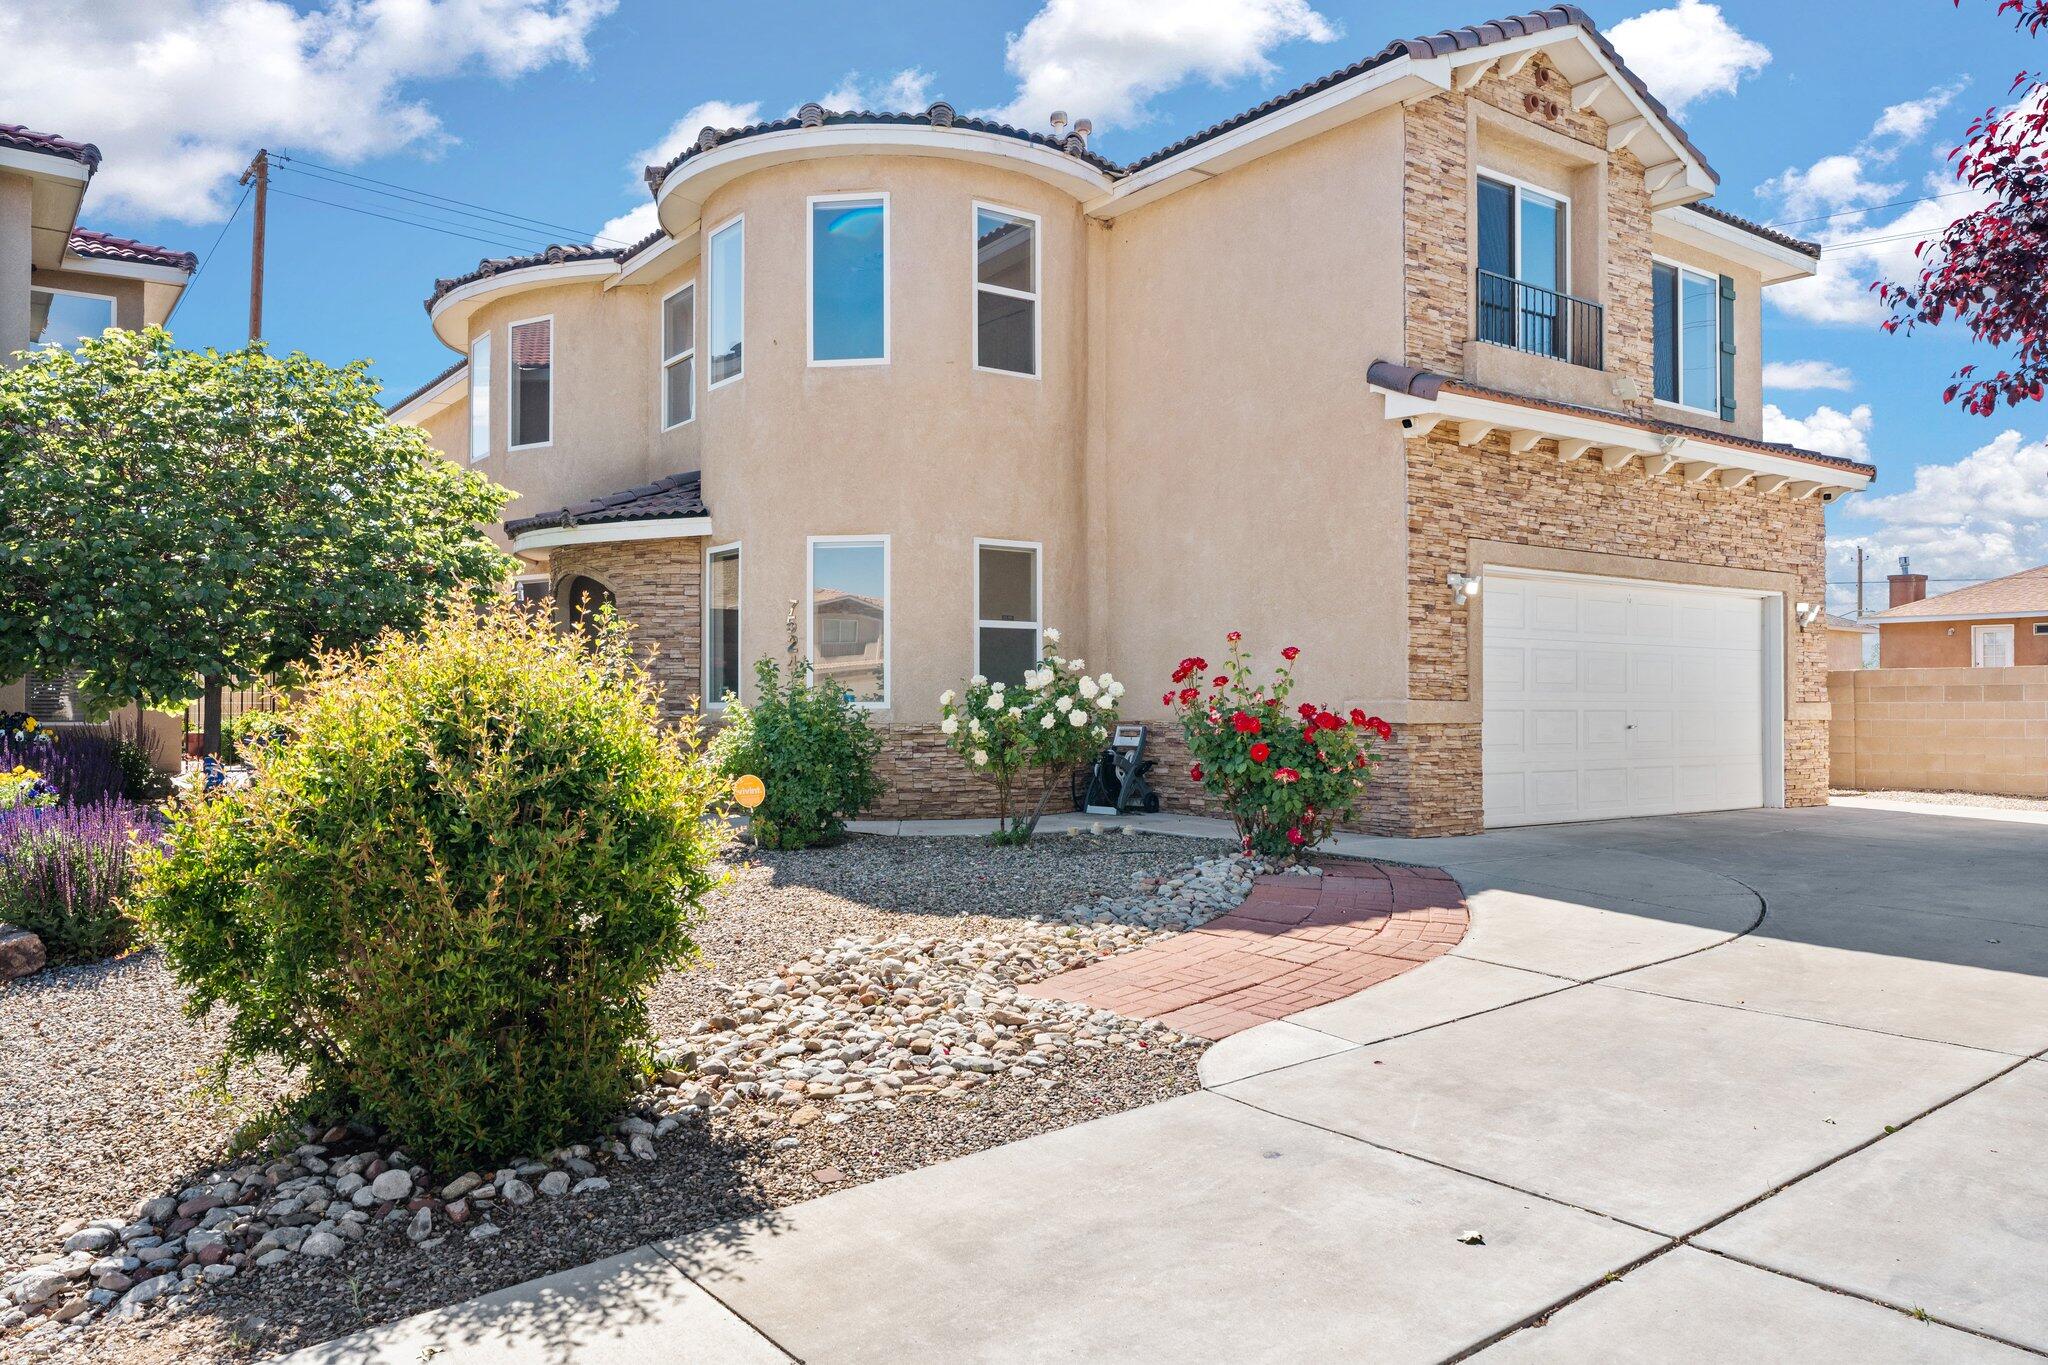 Come see this beautiful turnkey home in the La Cueva school district! It features 4 bedrooms plus an office, 3 bathrooms, 2 car garage, and a long driveway that is able to fit an additional 5 cars. The kitchen is open to one of the two living areas and features granite countertops, stainless steel appliances, and ample storage space, making it perfect for both cooking and entertaining! Retreat to the luxurious primary bedroom with amazing views of the Sandias from your balcony. Refrigerated air and absolutely no carpet!! Outside, enjoy the backyard oasis, complete with an incredible saltwater pool and hot tub!! With its convenient location close to parks, schools, and shops, this home offers the perfect blend of comfort and convenience. Schedule you private showing today!